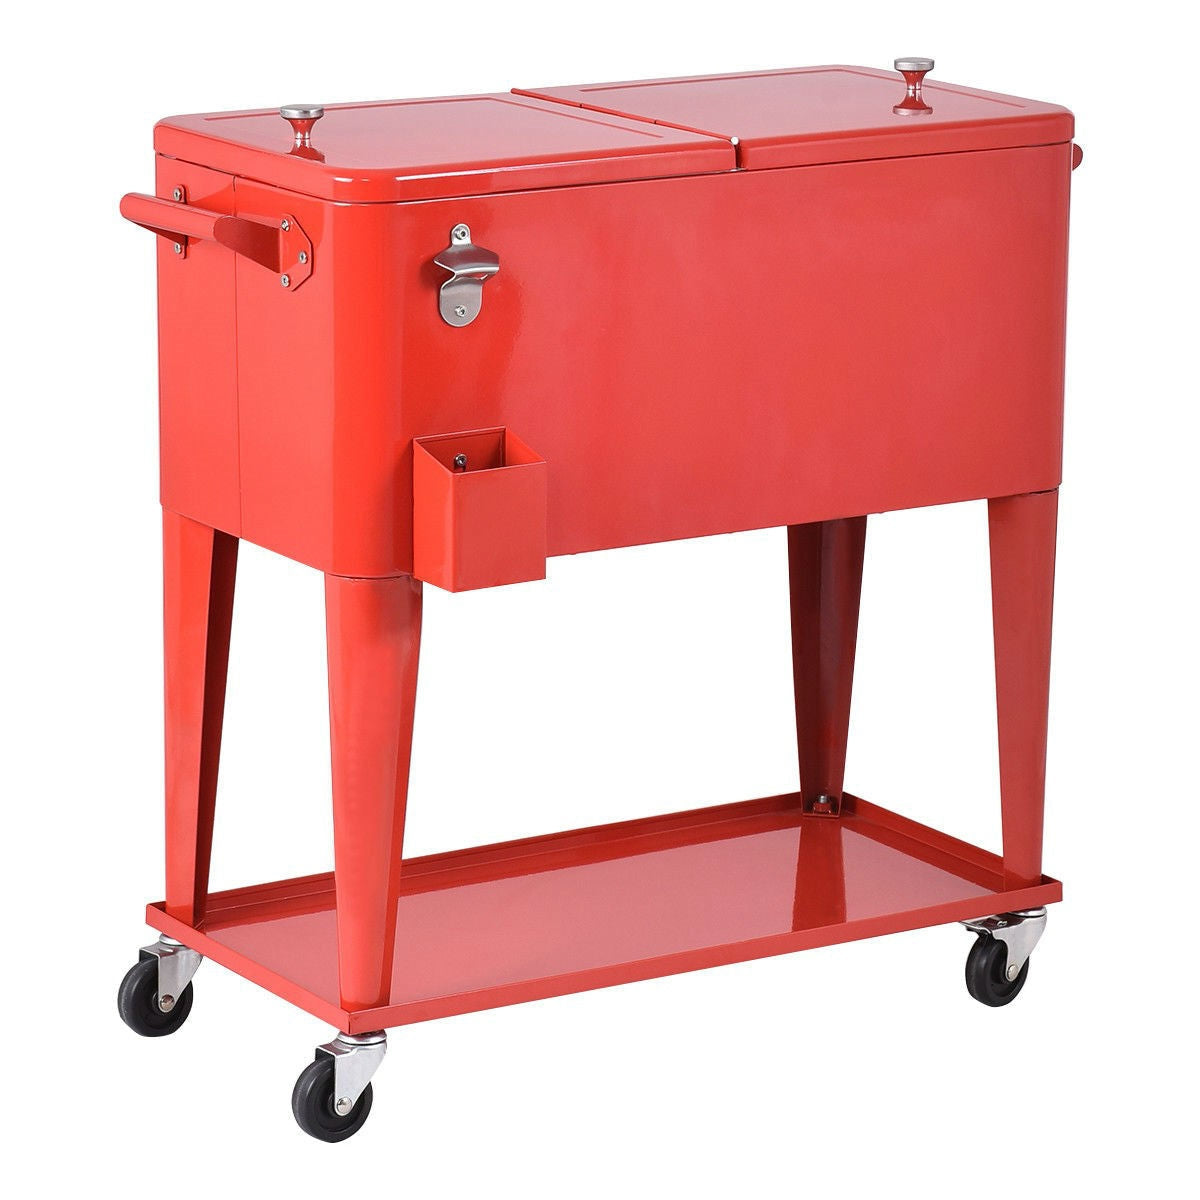 Kitchen > Wine Racks And Coolers - 80 Quart Red Sturdy Rolling Steel Construction Cooler